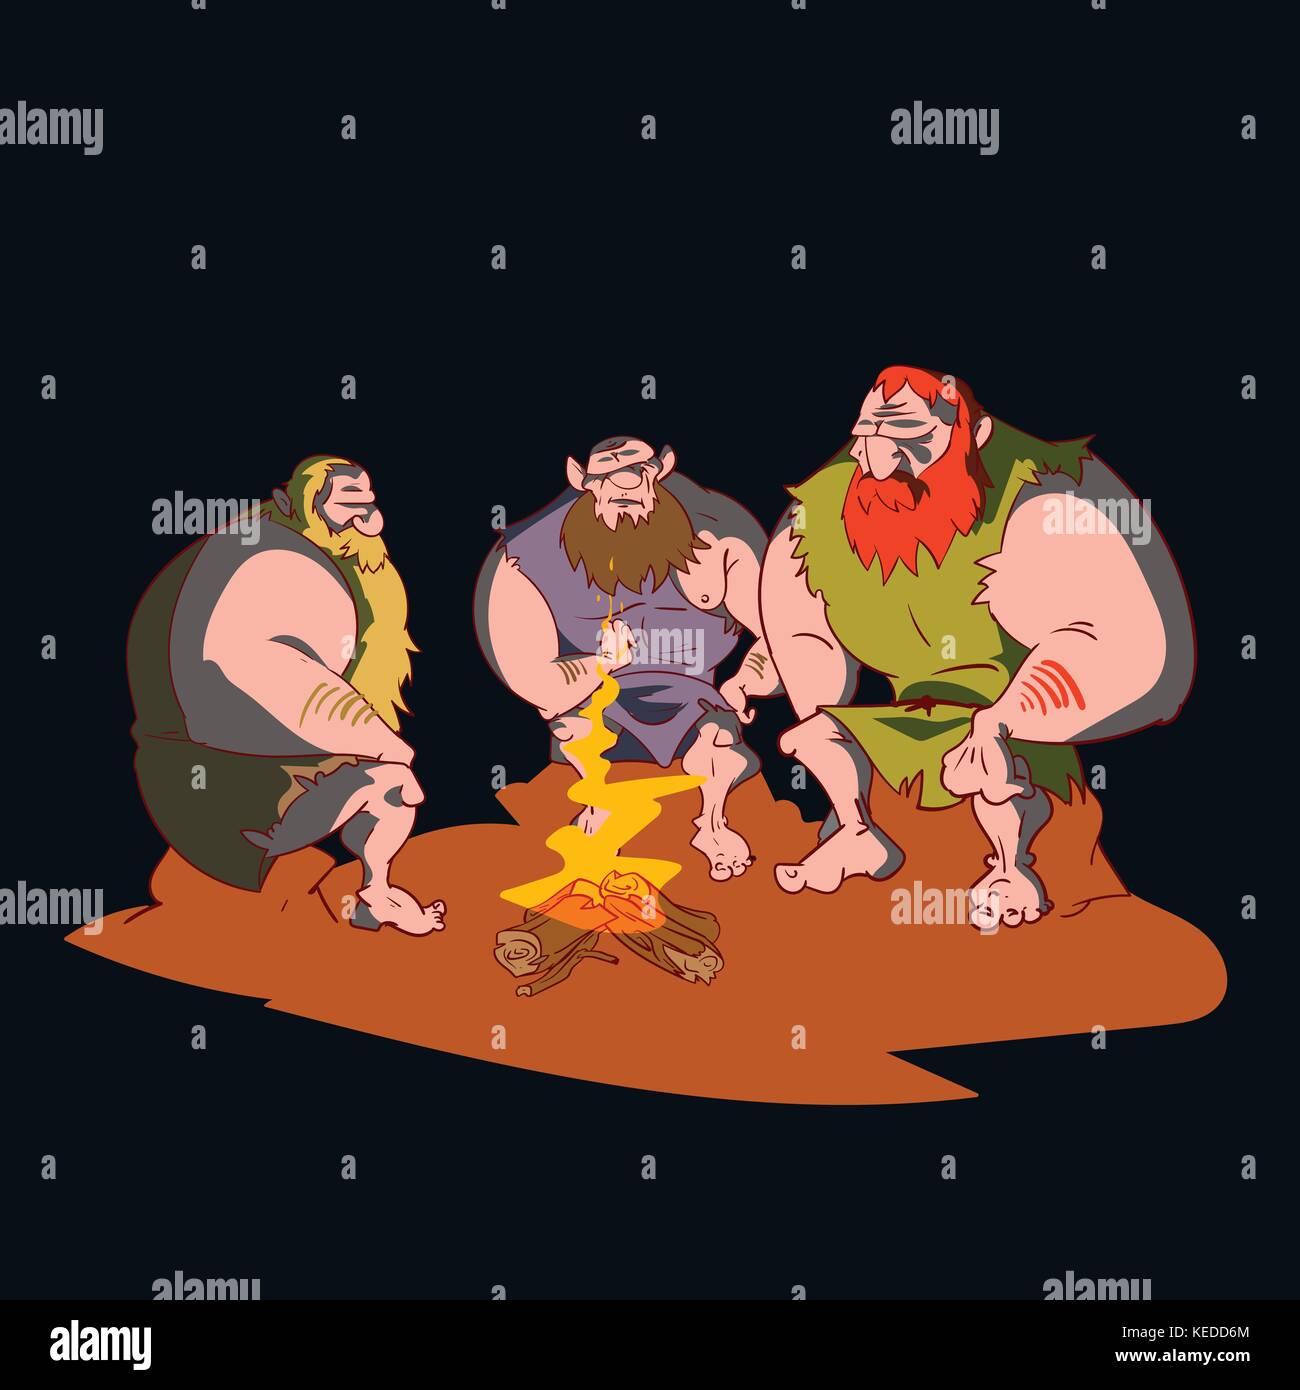 Colorful vector illustration of three cavemen sitting around a campfire at night. Stock Vector